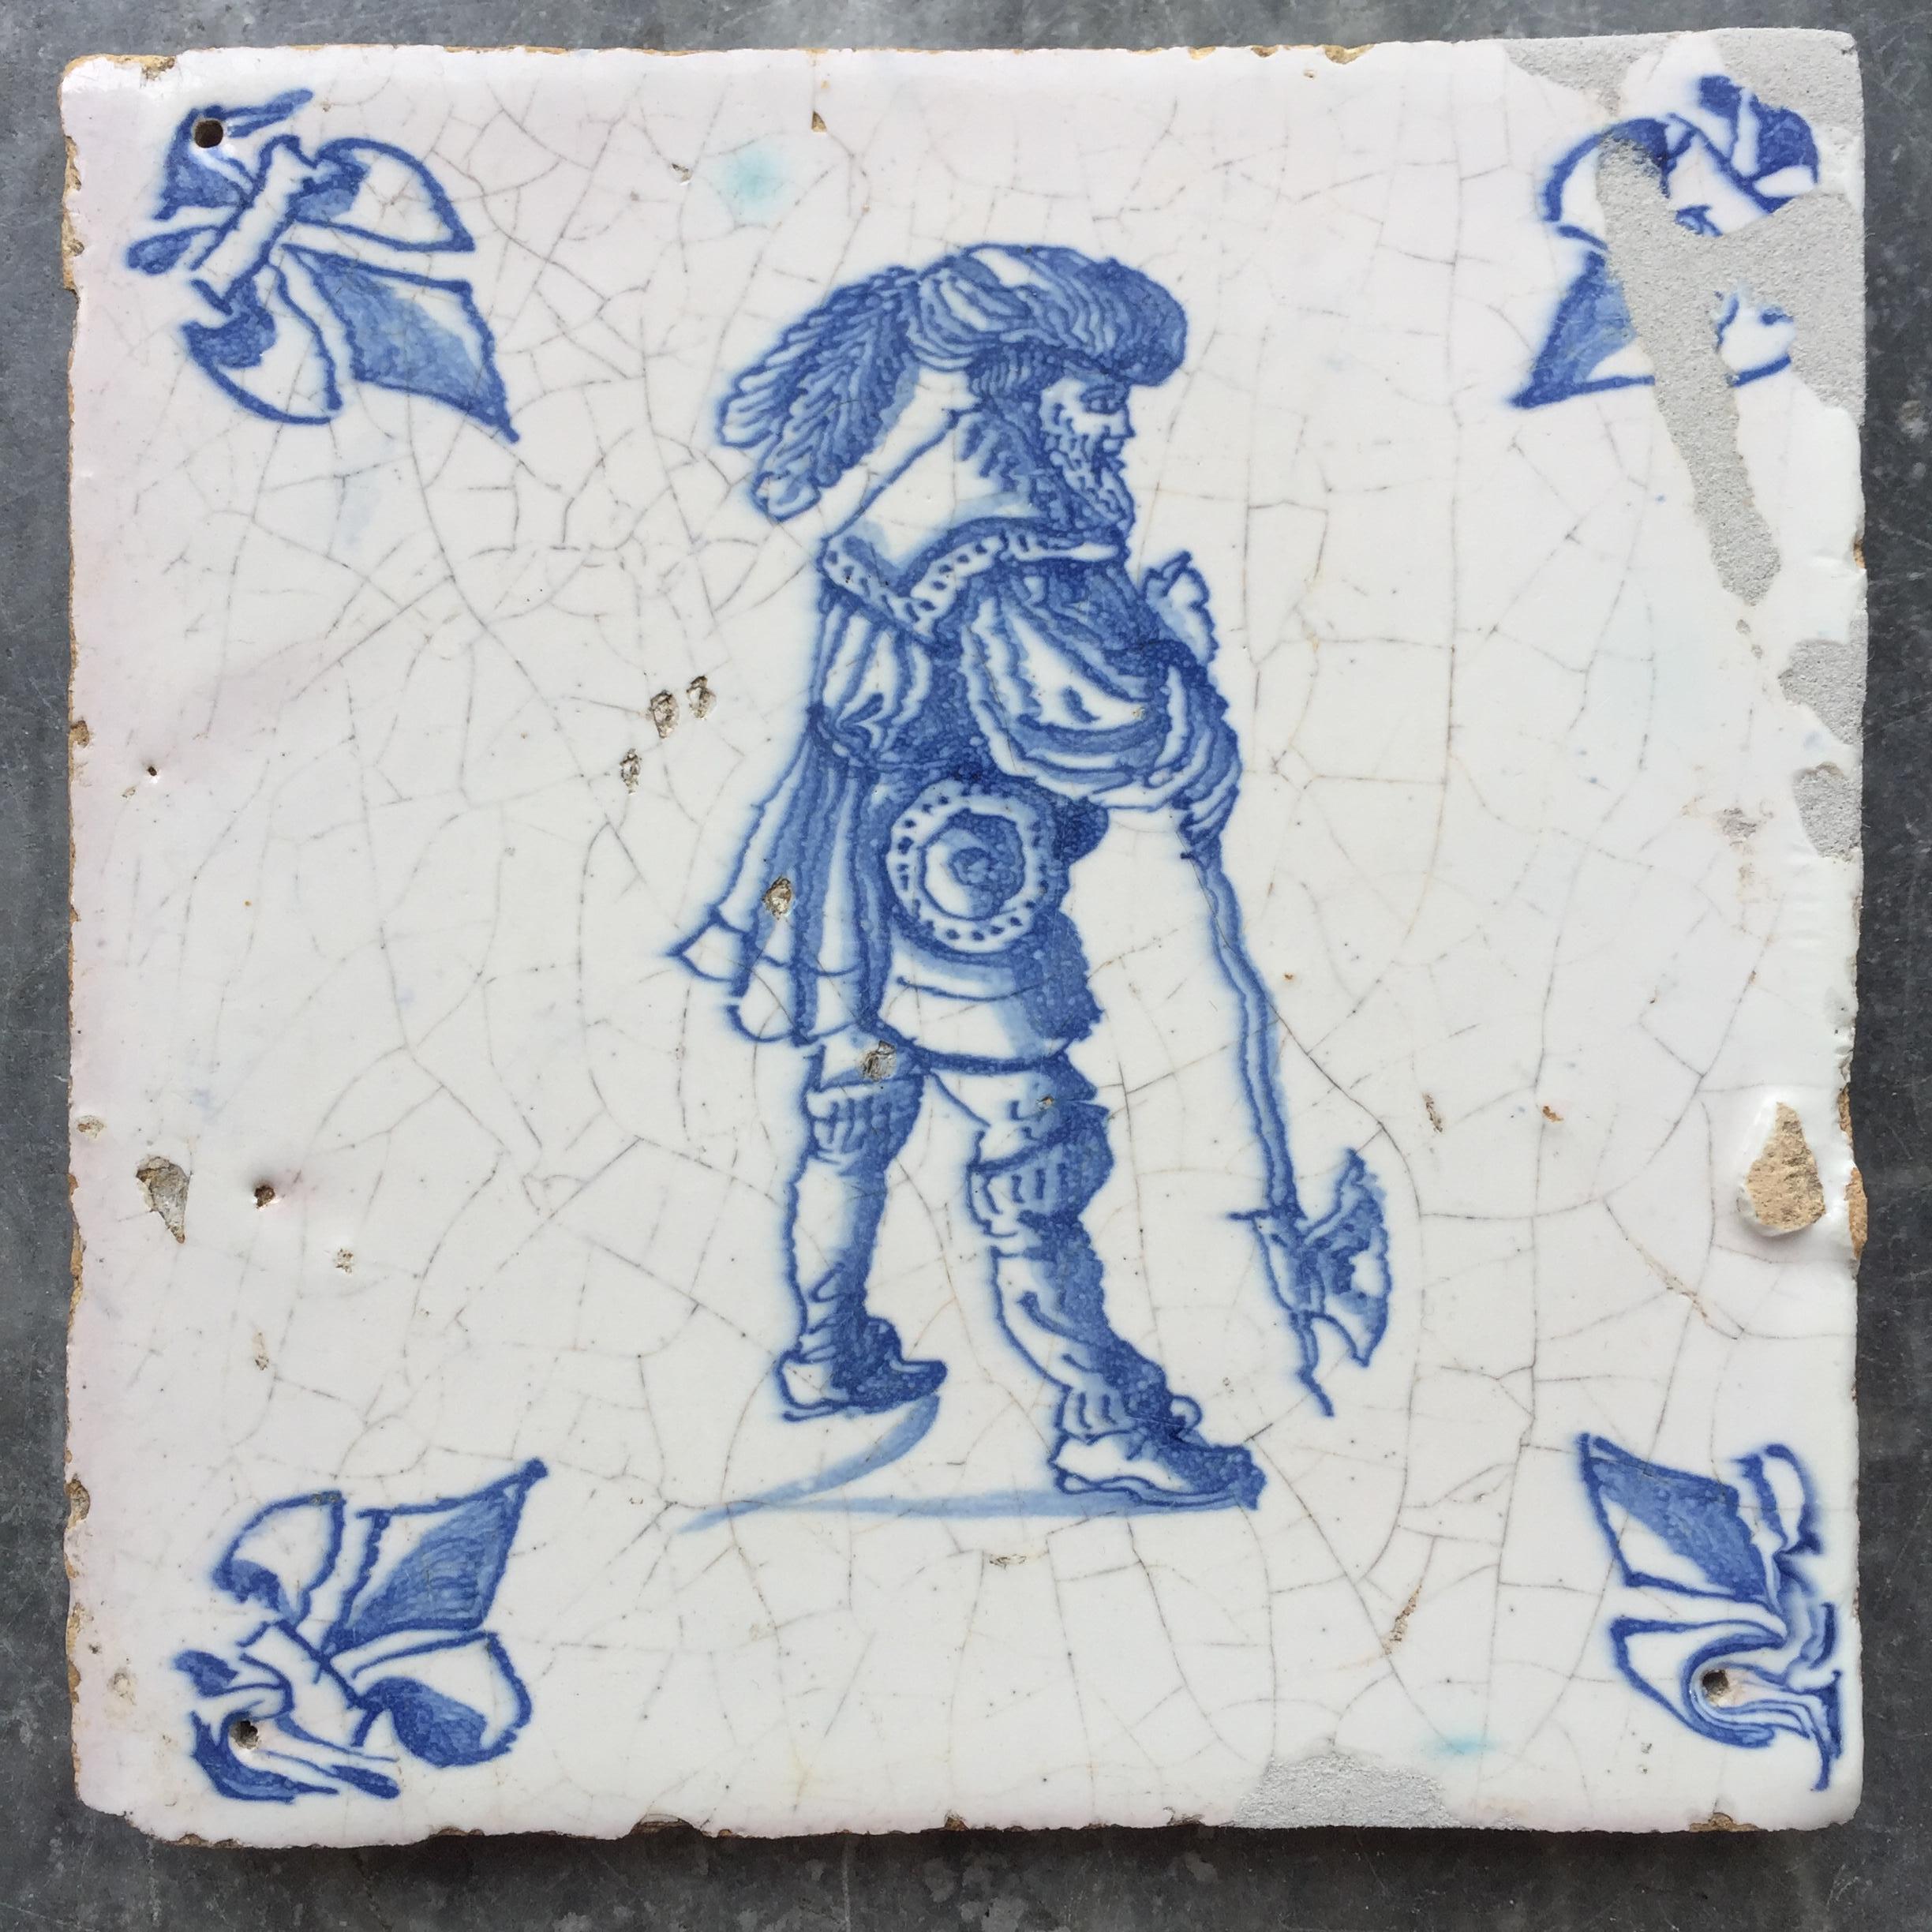 17th Century Exceptional Set of 20 Blue and White Dutch Delft Tiles with Figures